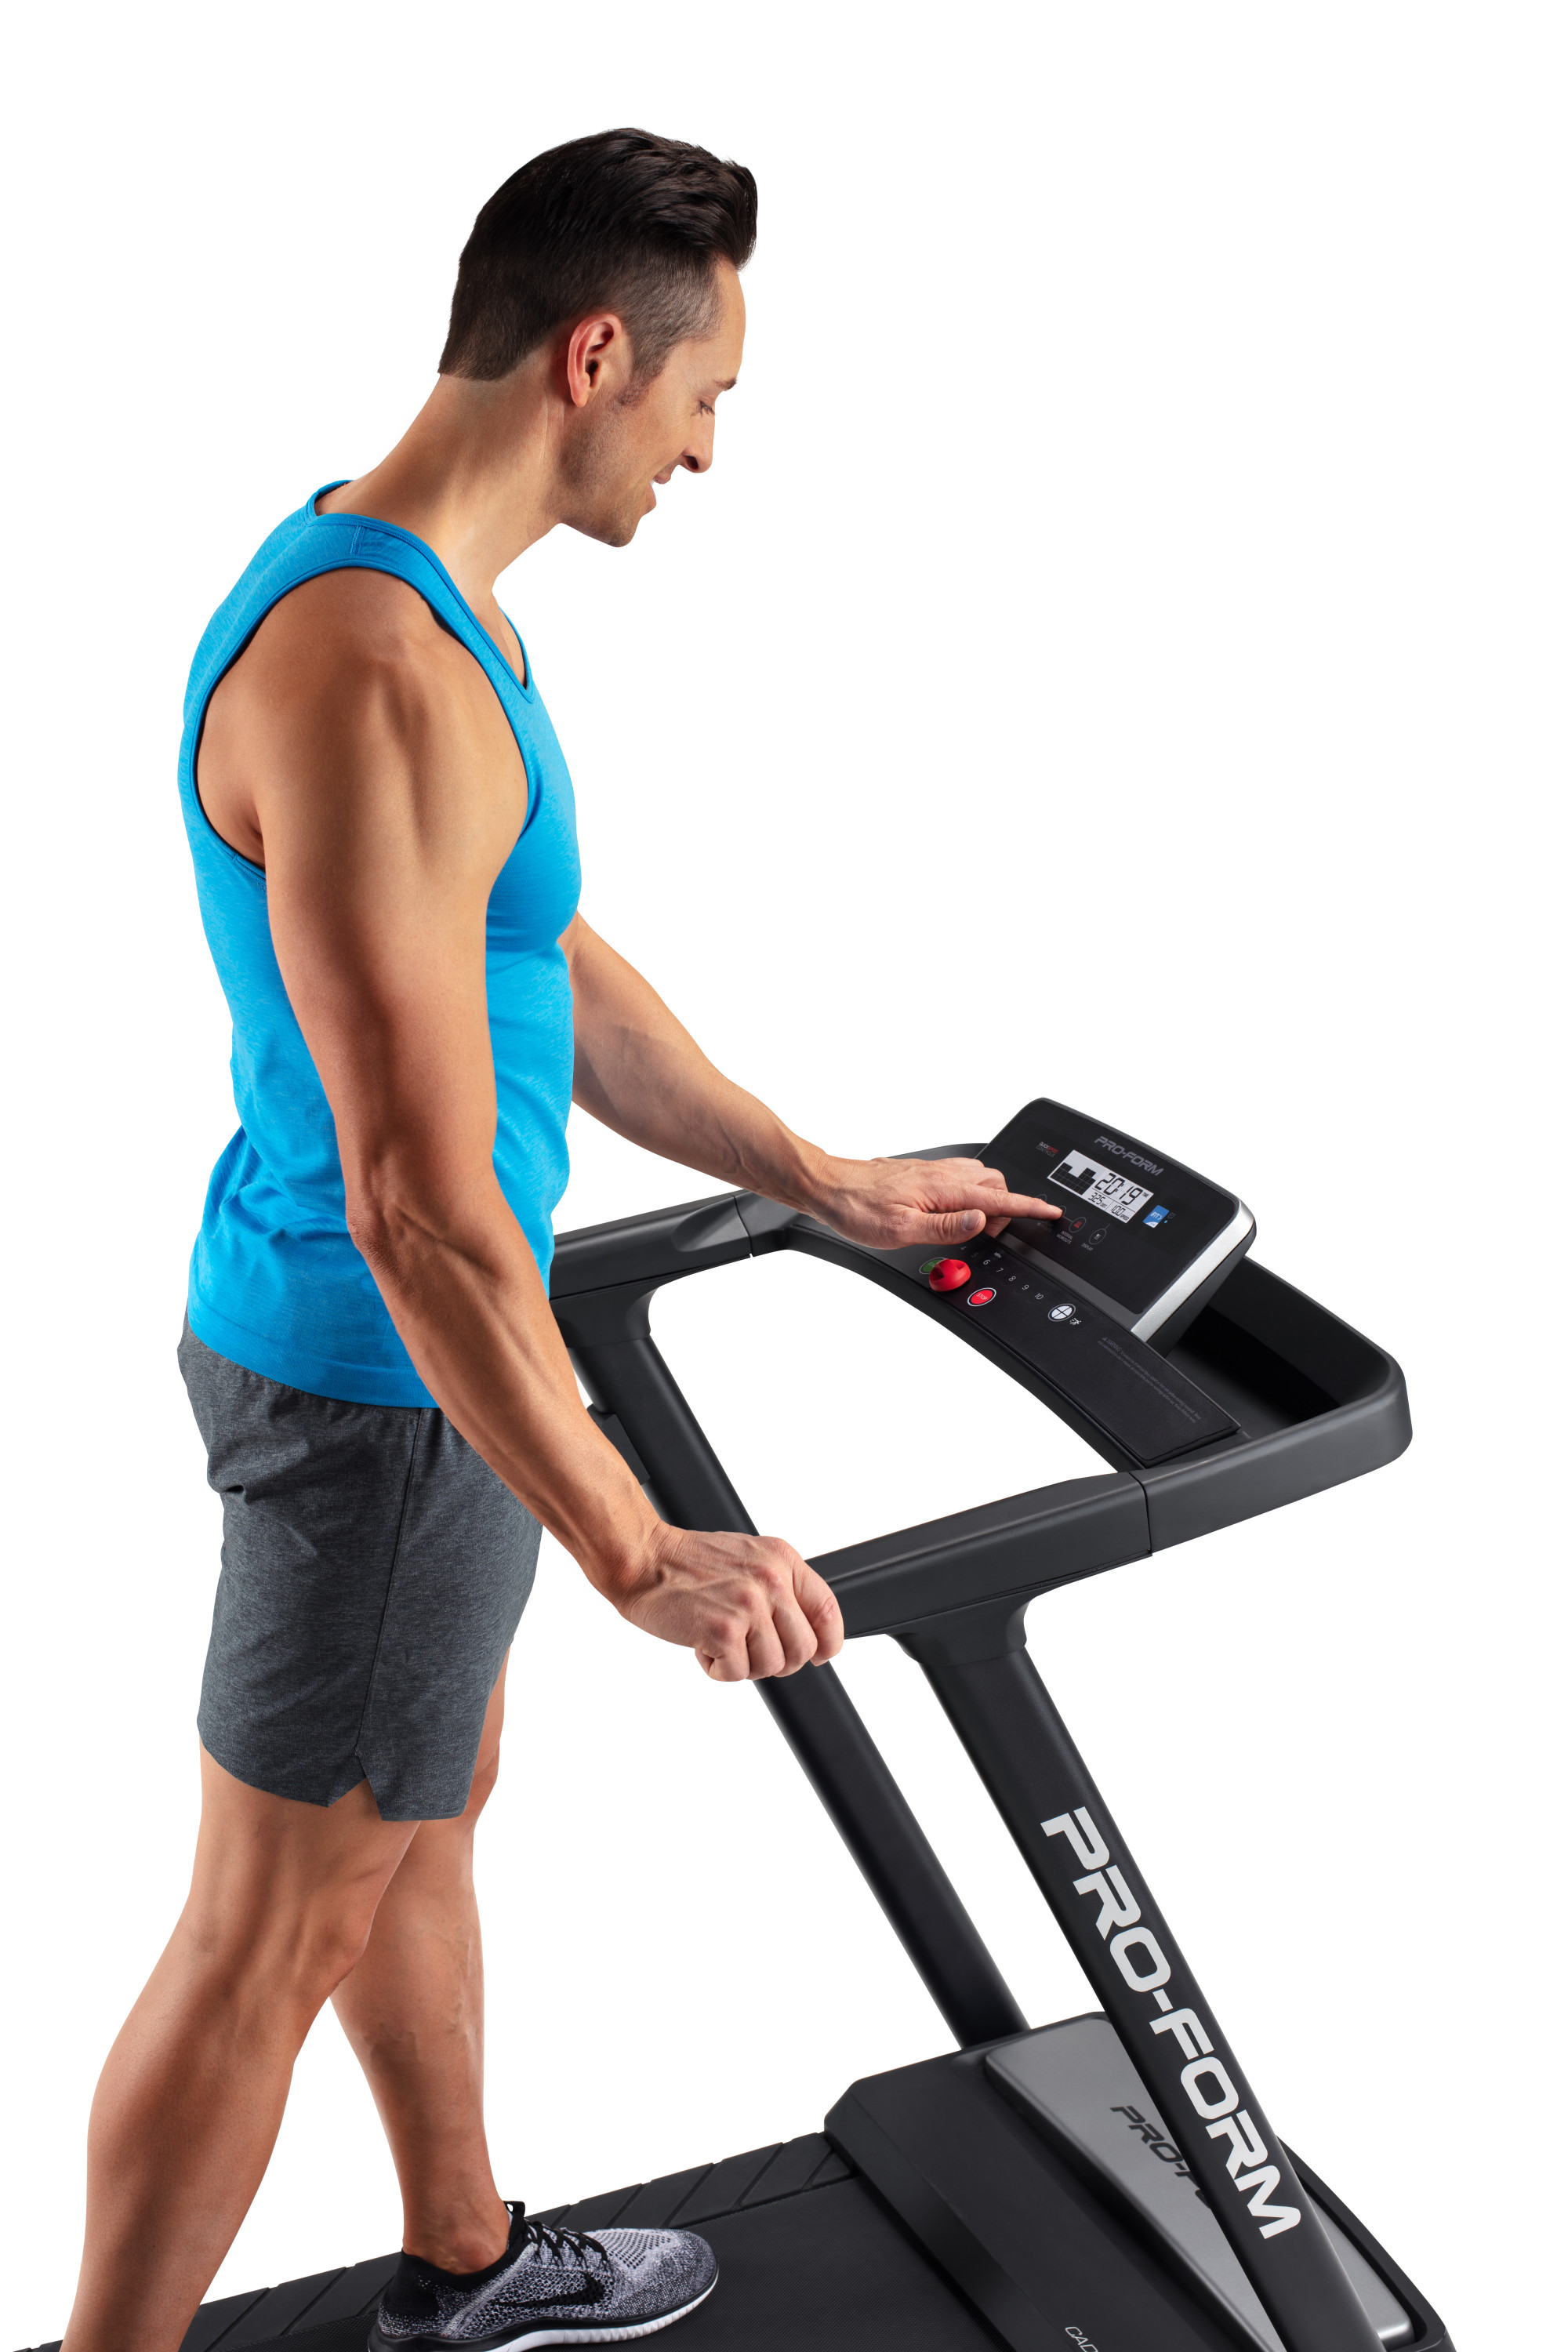 ProForm Cadence WLT Folding Treadmill with Reflex Deck for Walking and Jogging, iFit Bluetooth Enabled - image 21 of 31